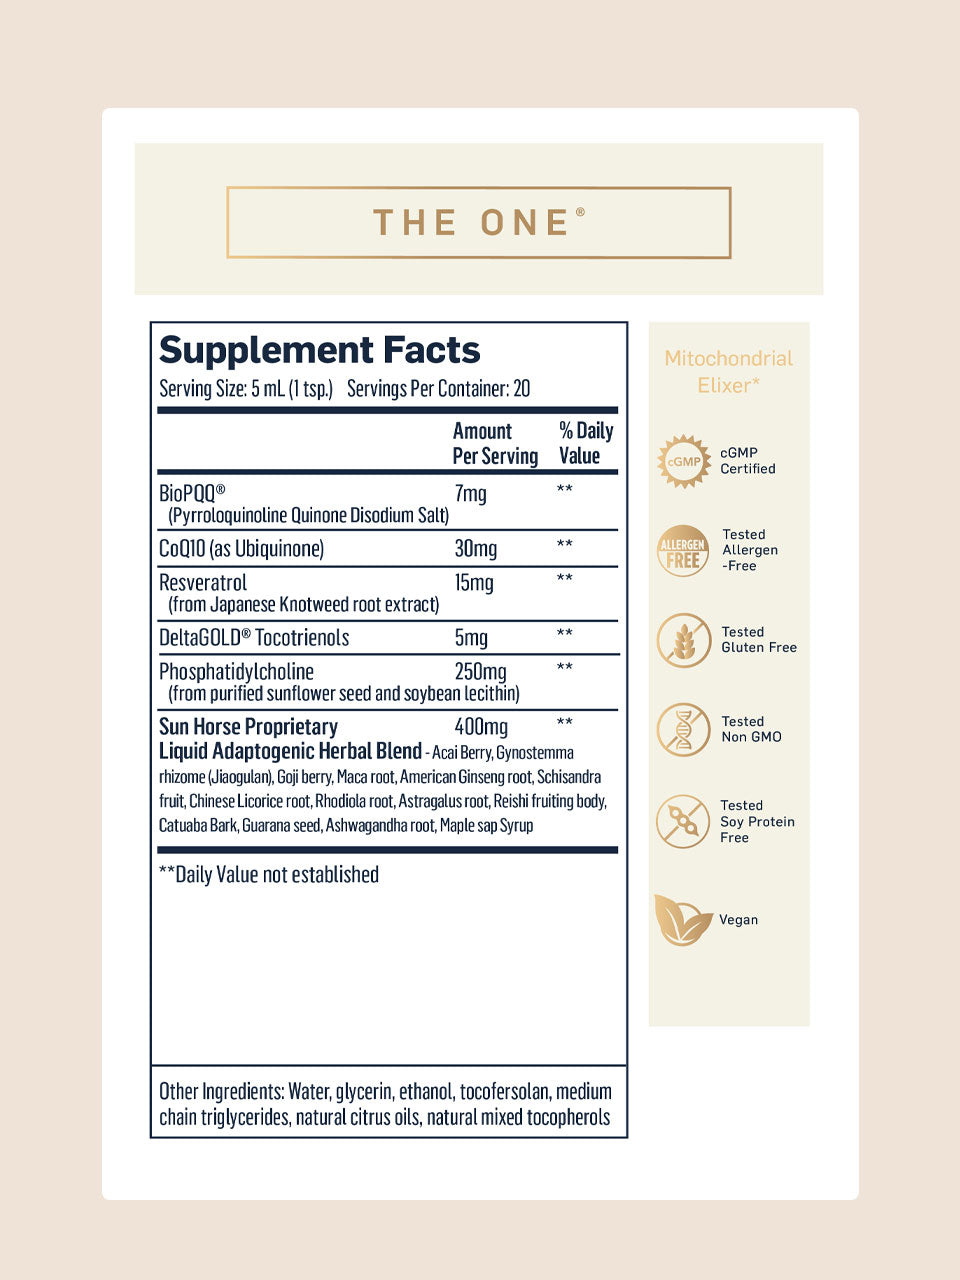 The One Mitochondrial Optimizer - Energy Supplement